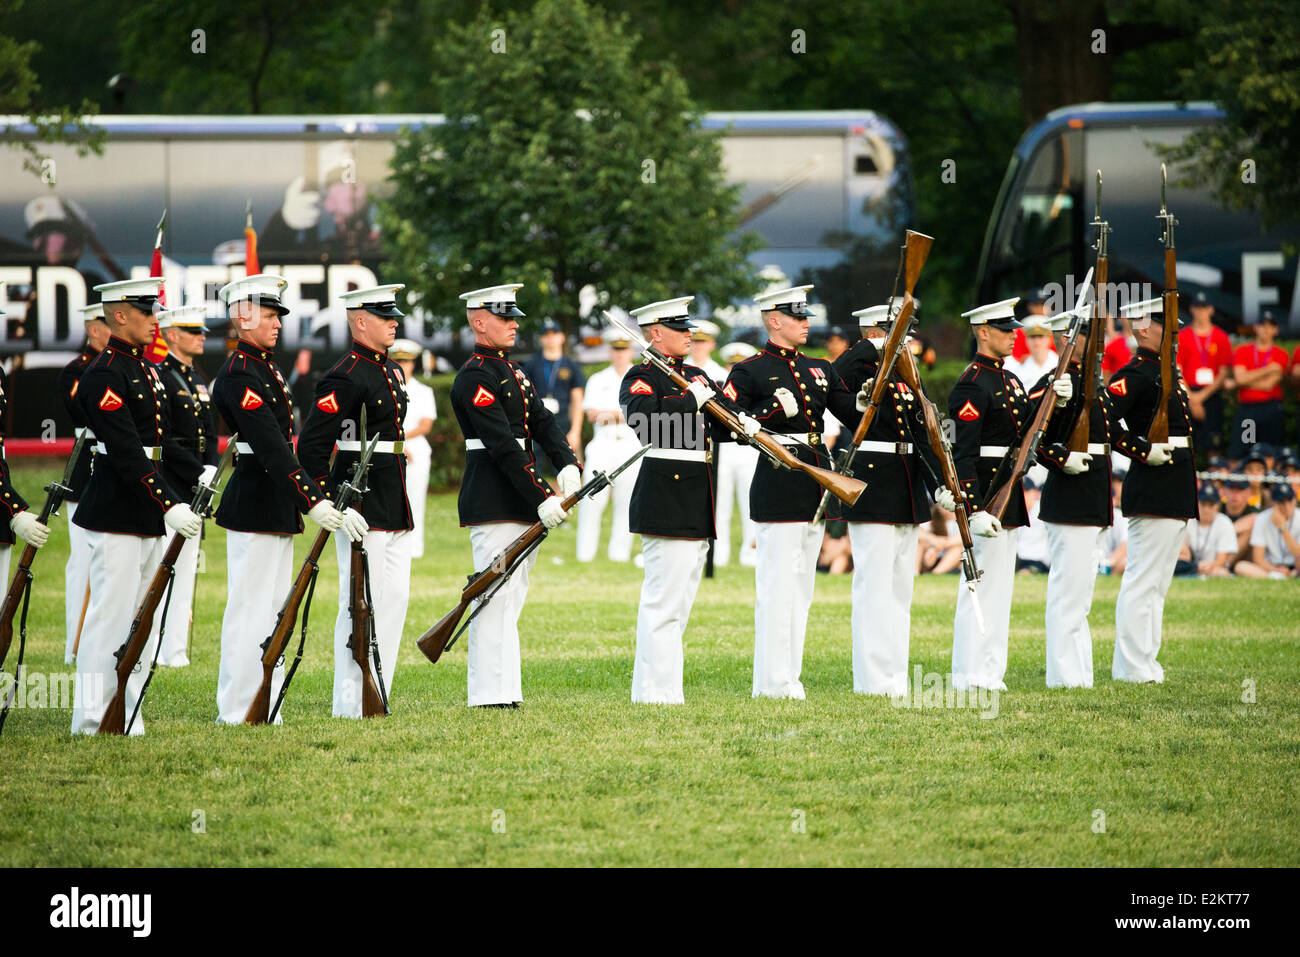 The US Marine Corps Silent Drill Platoon performs their drills during the Sunset Parade at the Iwo Jima Memorial in Arlington, Virginia. Stock Photo